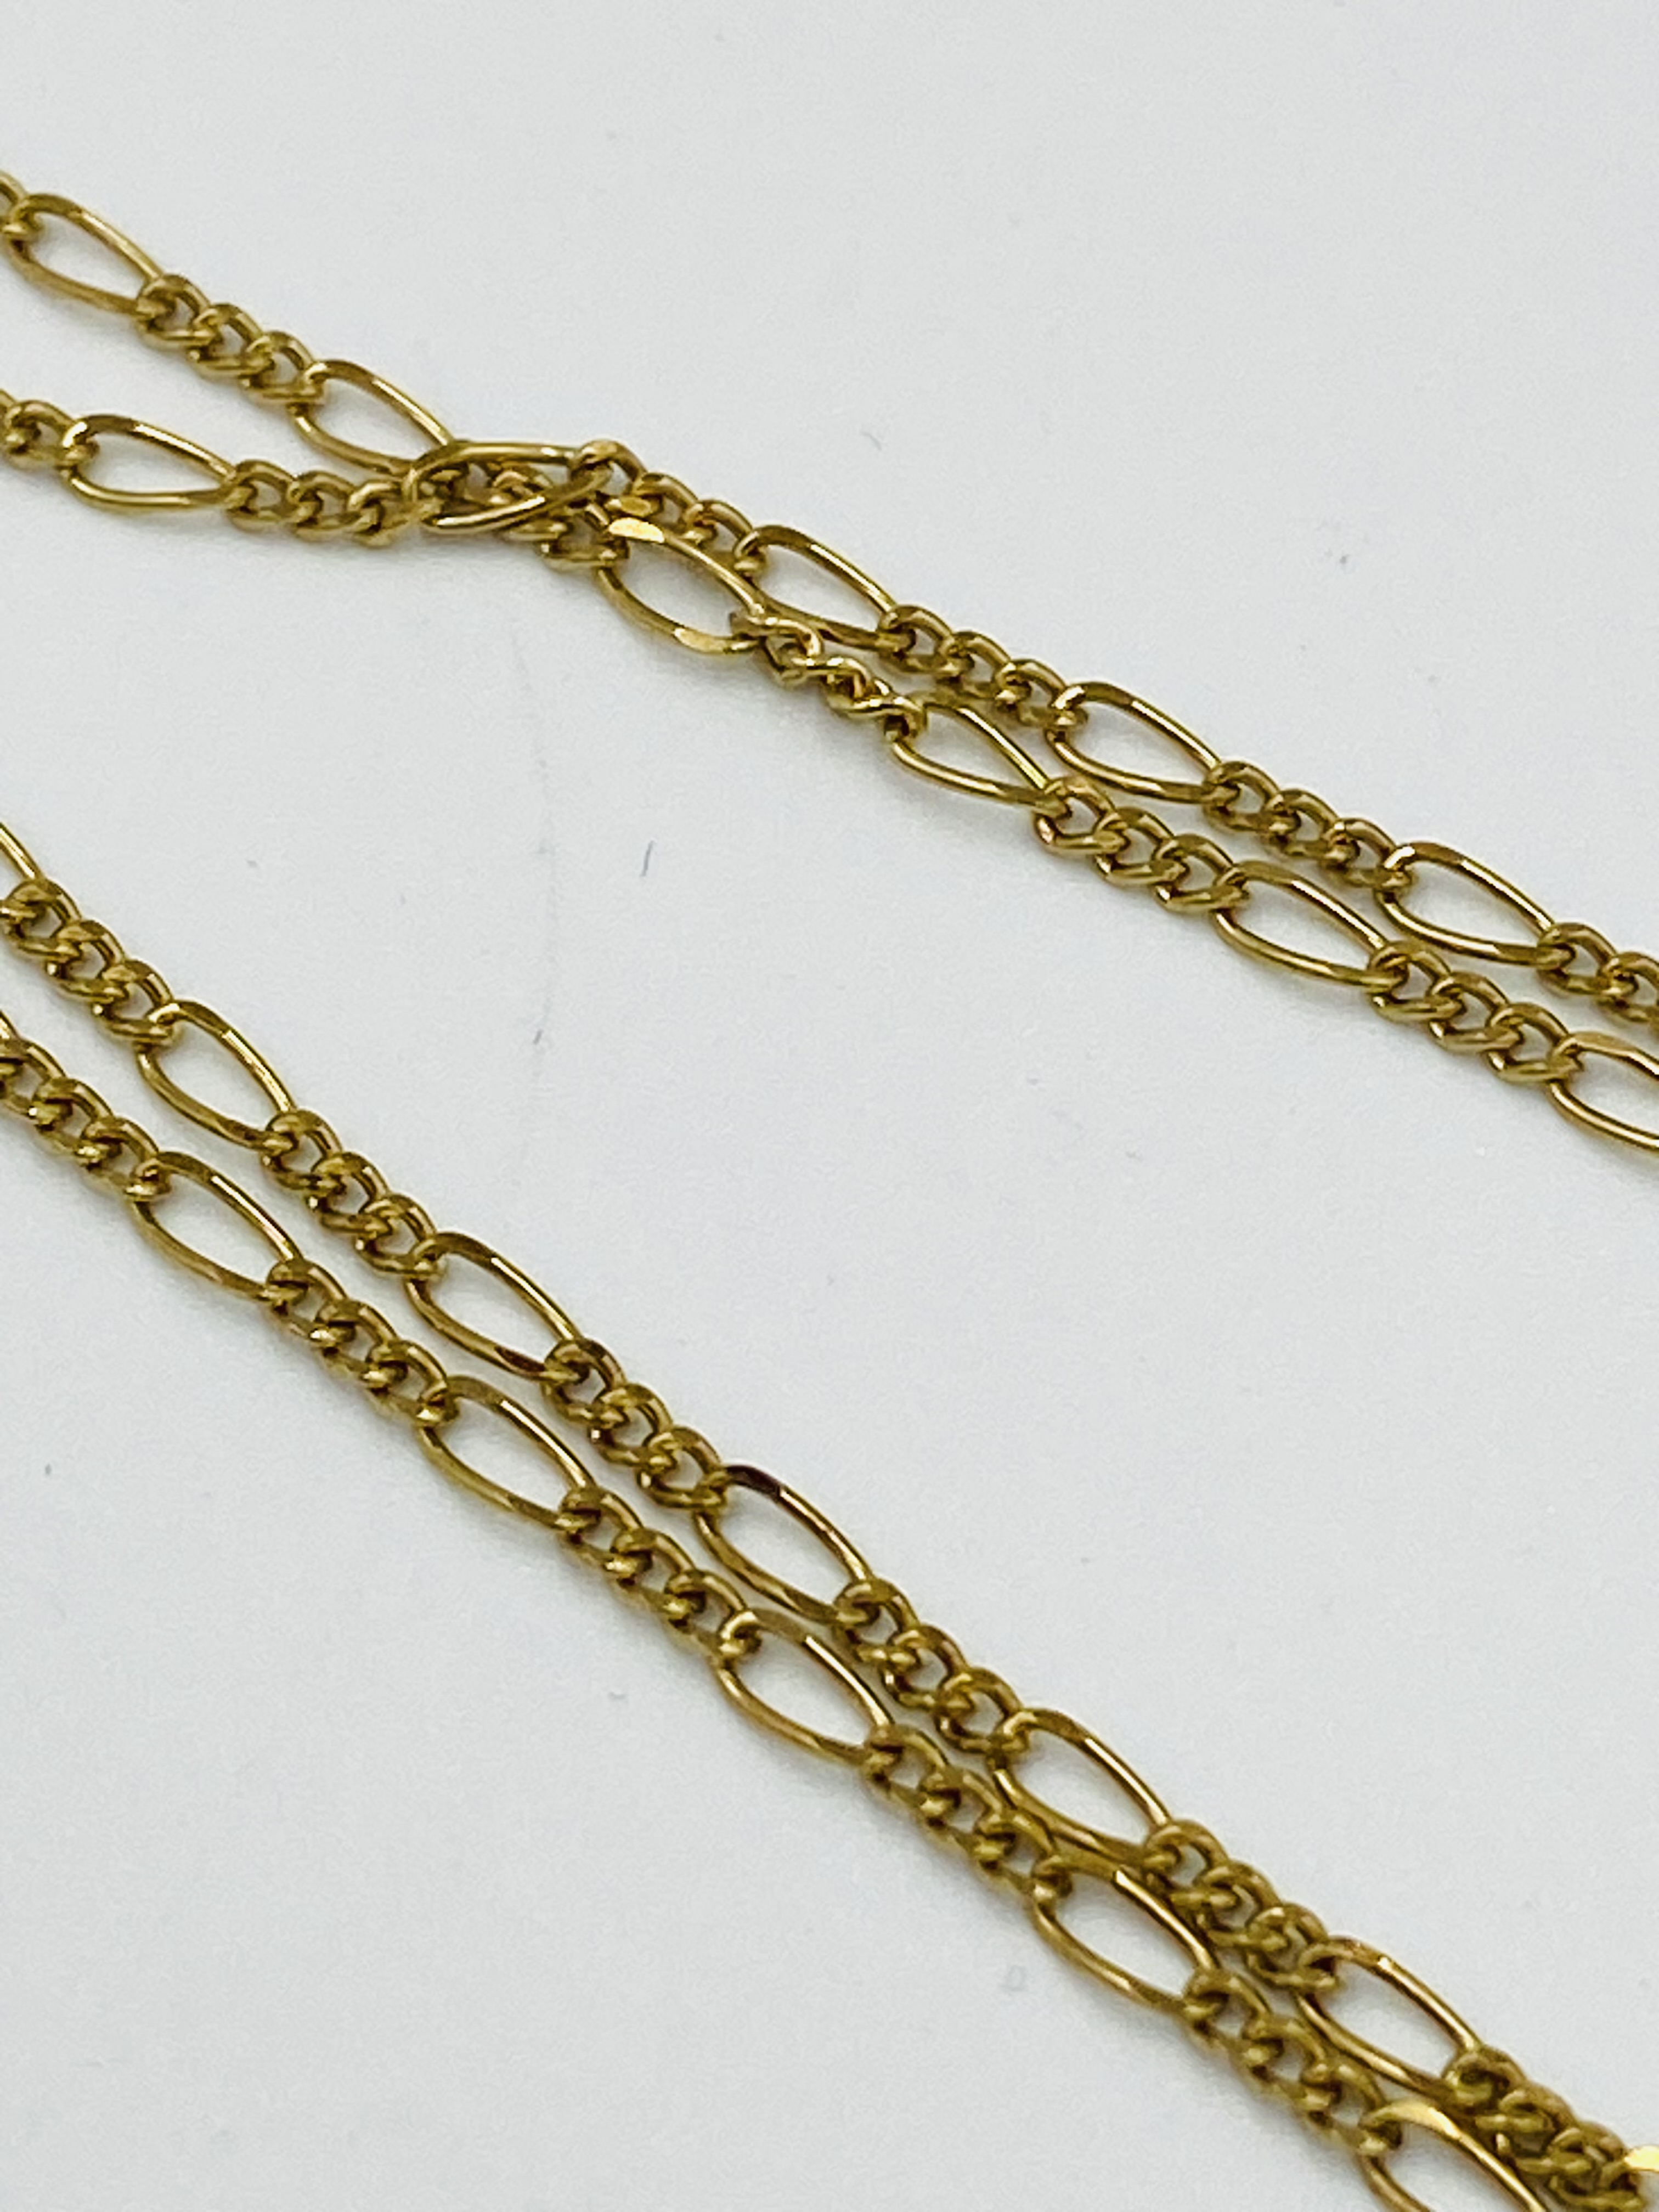 9ct gold link chain - Image 2 of 4